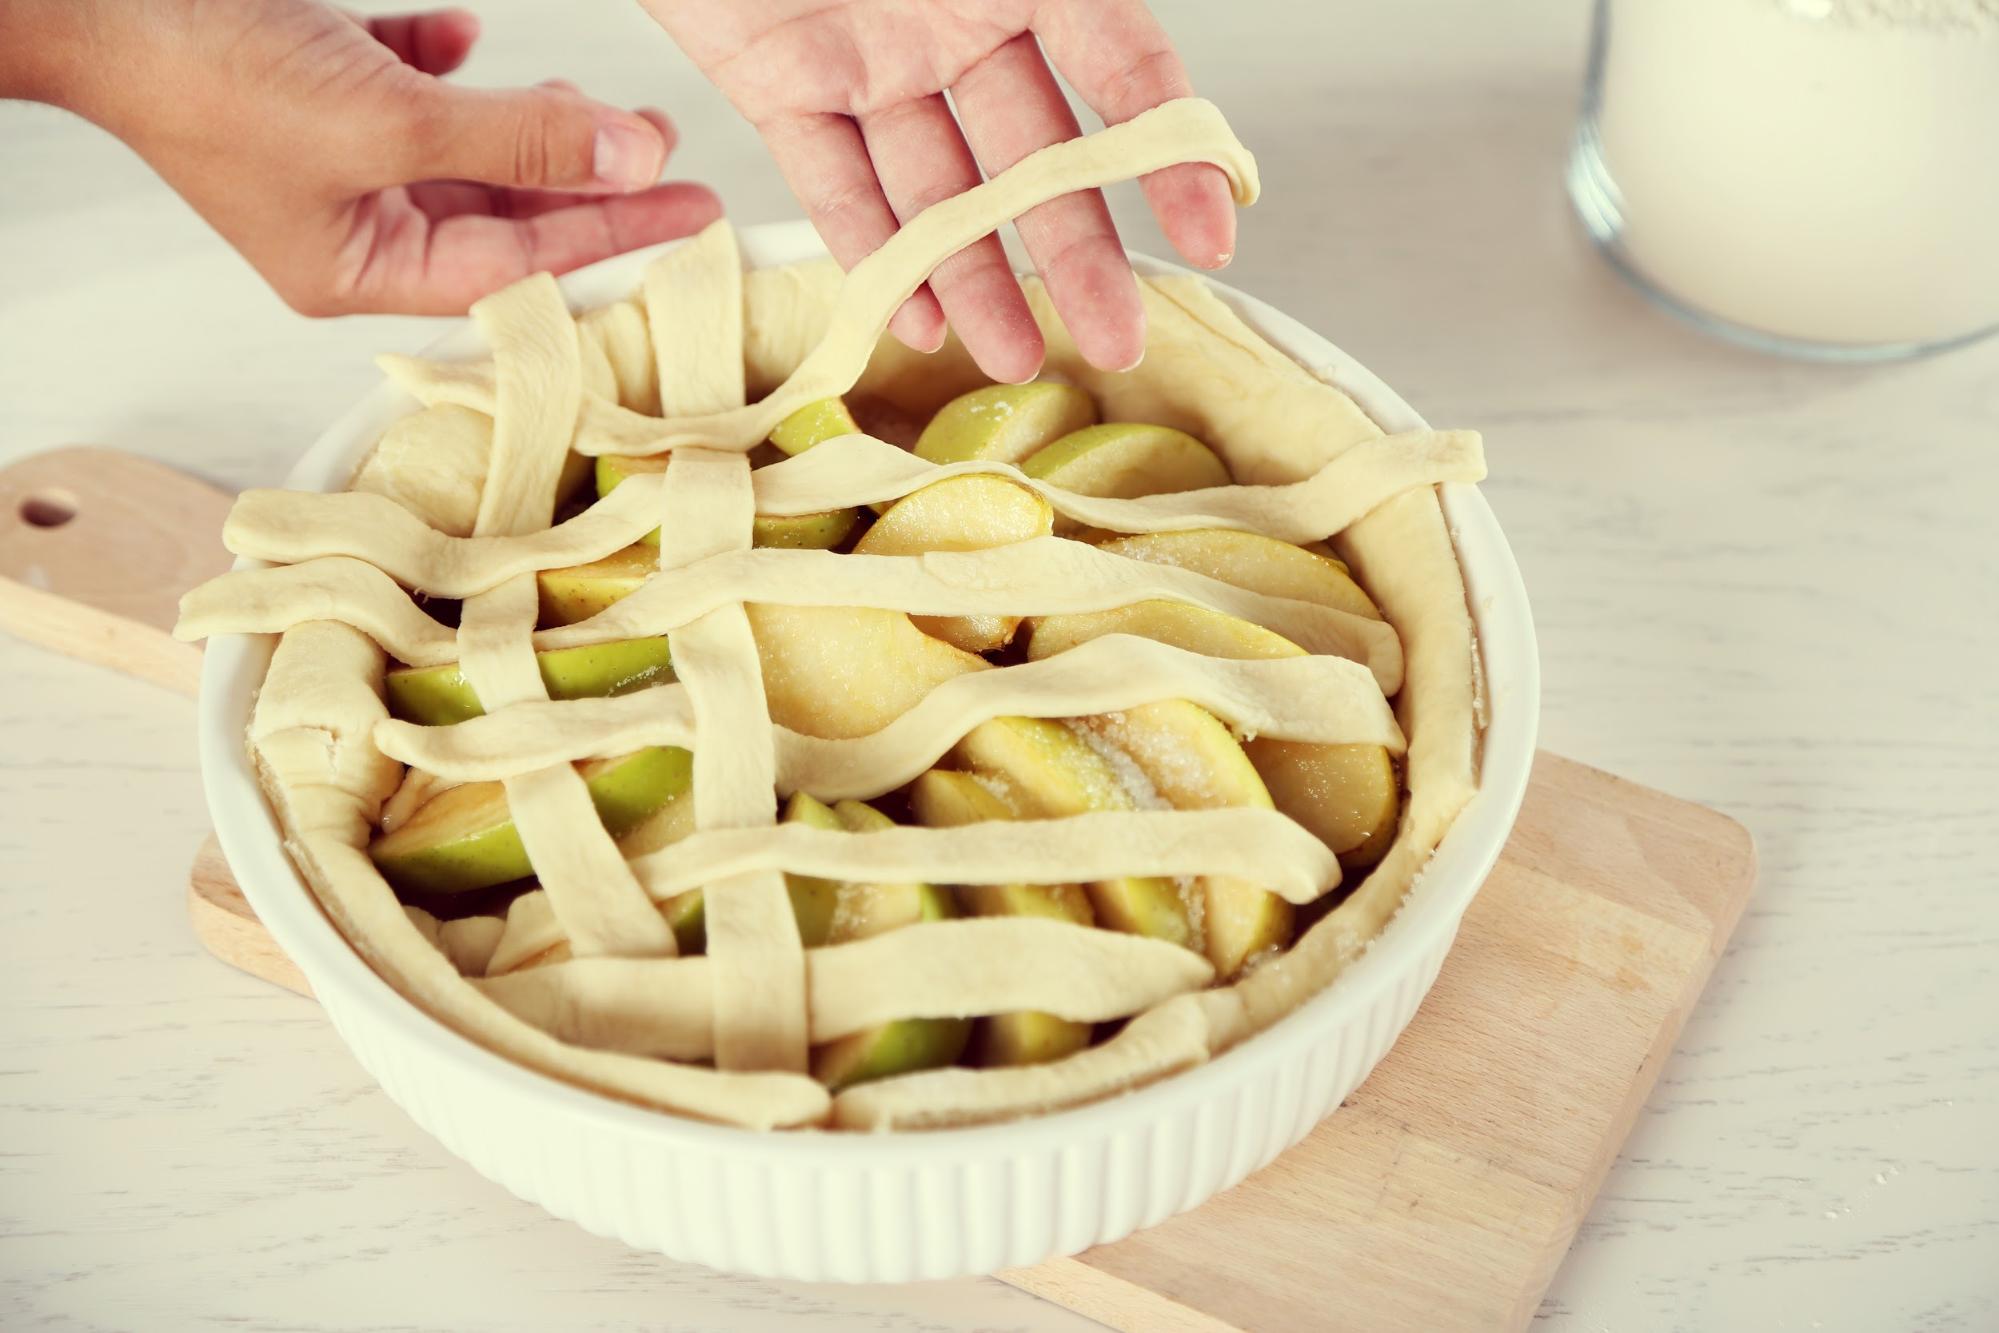 Some apple varieties are better than others for baking